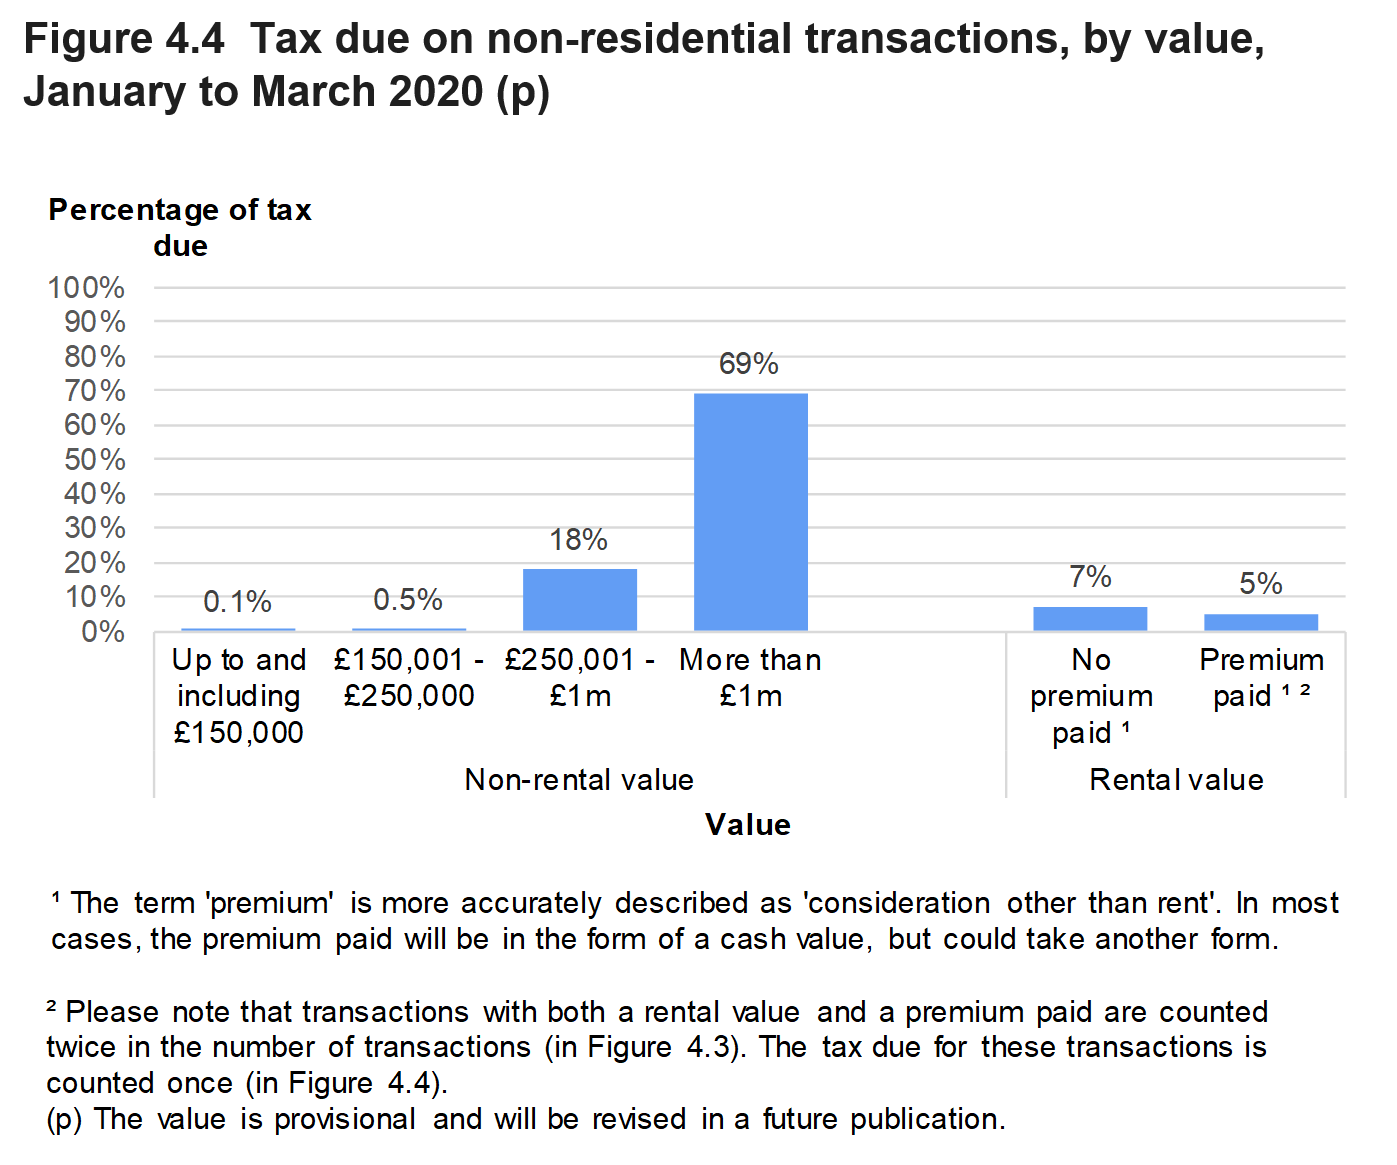 Figure 4.4 shows the amount of tax due on non-residential transactions, by value of the property. Data is presented as the percentage of transactions and relates to transactions effective in January to March 2020.